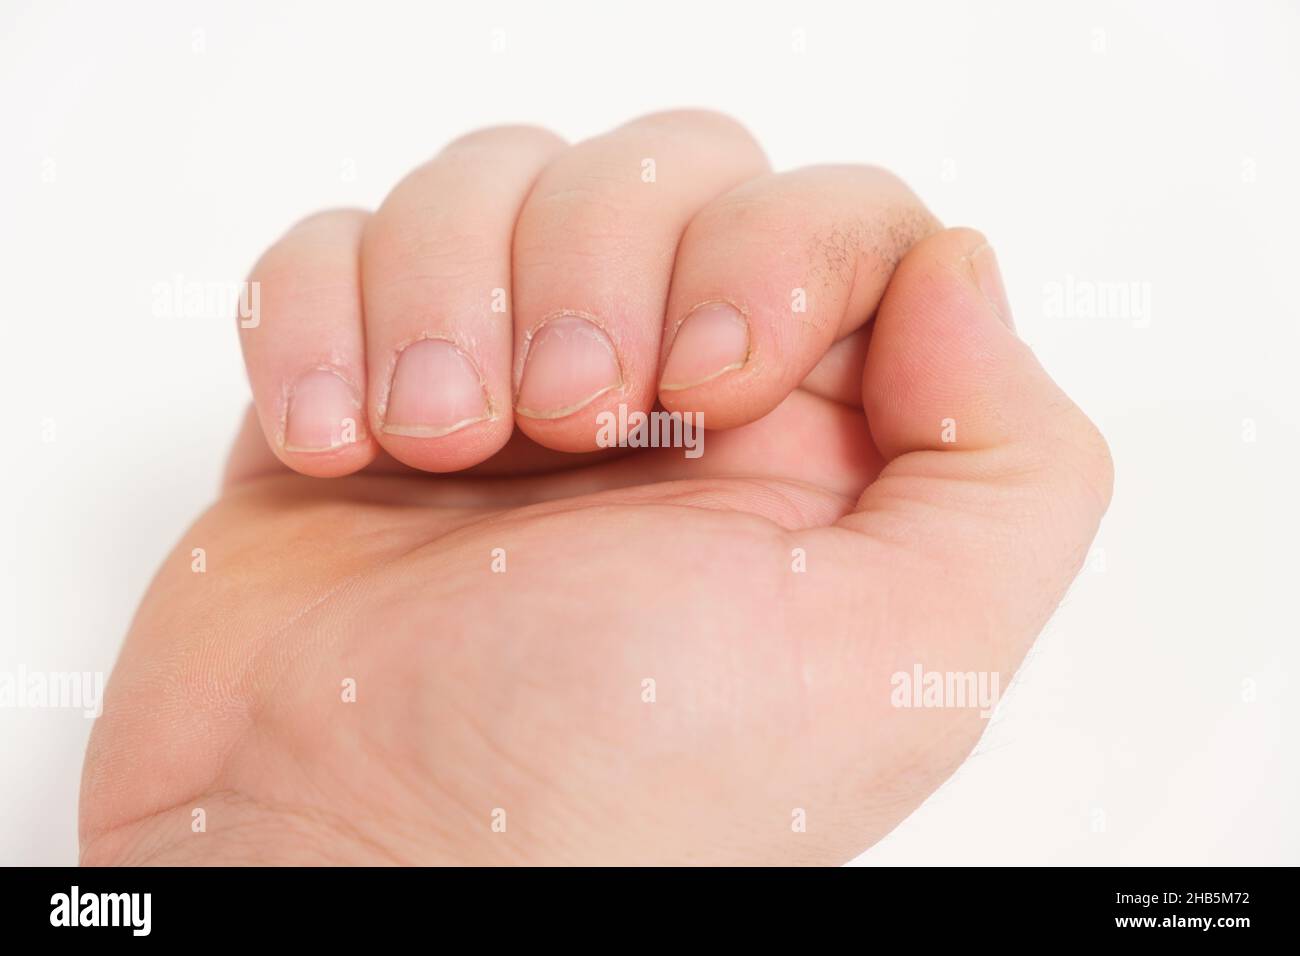 Unkempt male nails with a regrown cuticle on a white background Stock Photo